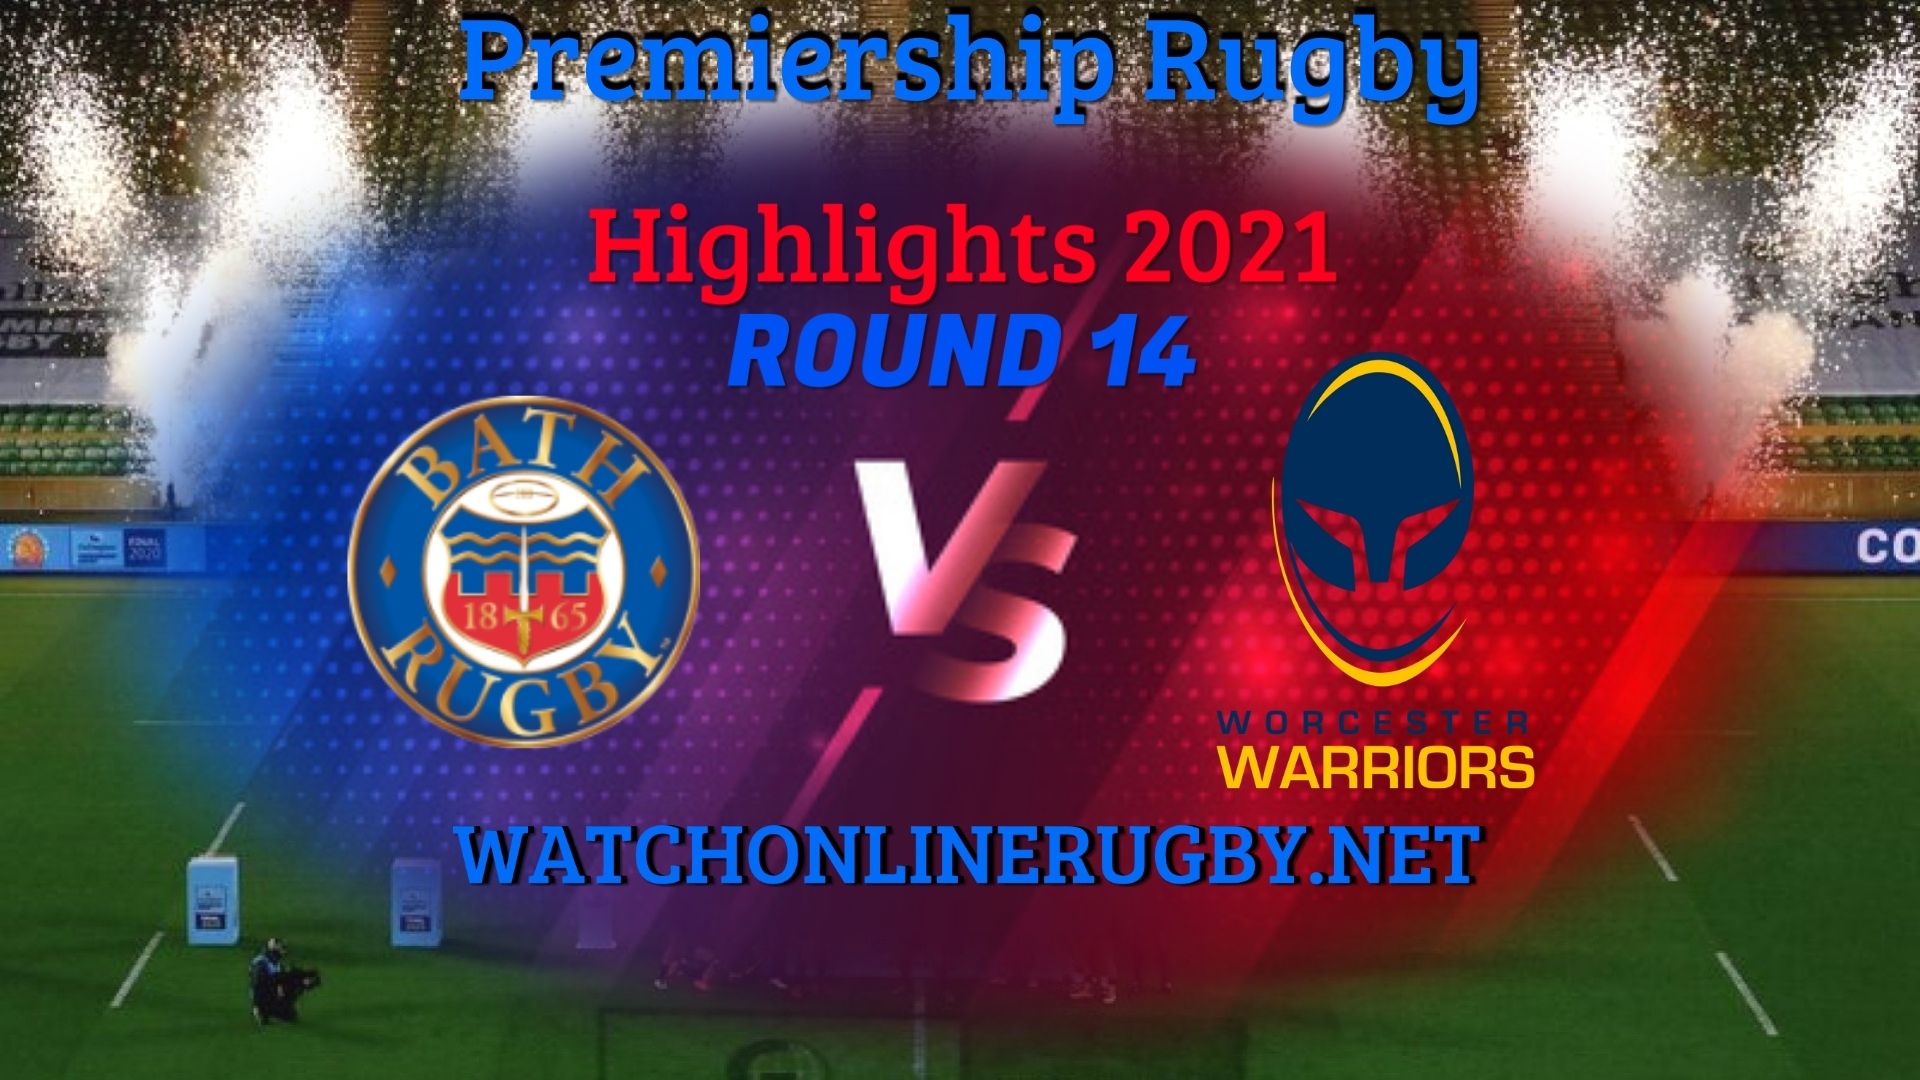 Bath Rugby Vs Worcester Warriors Premiership Rugby 2021 RD 14